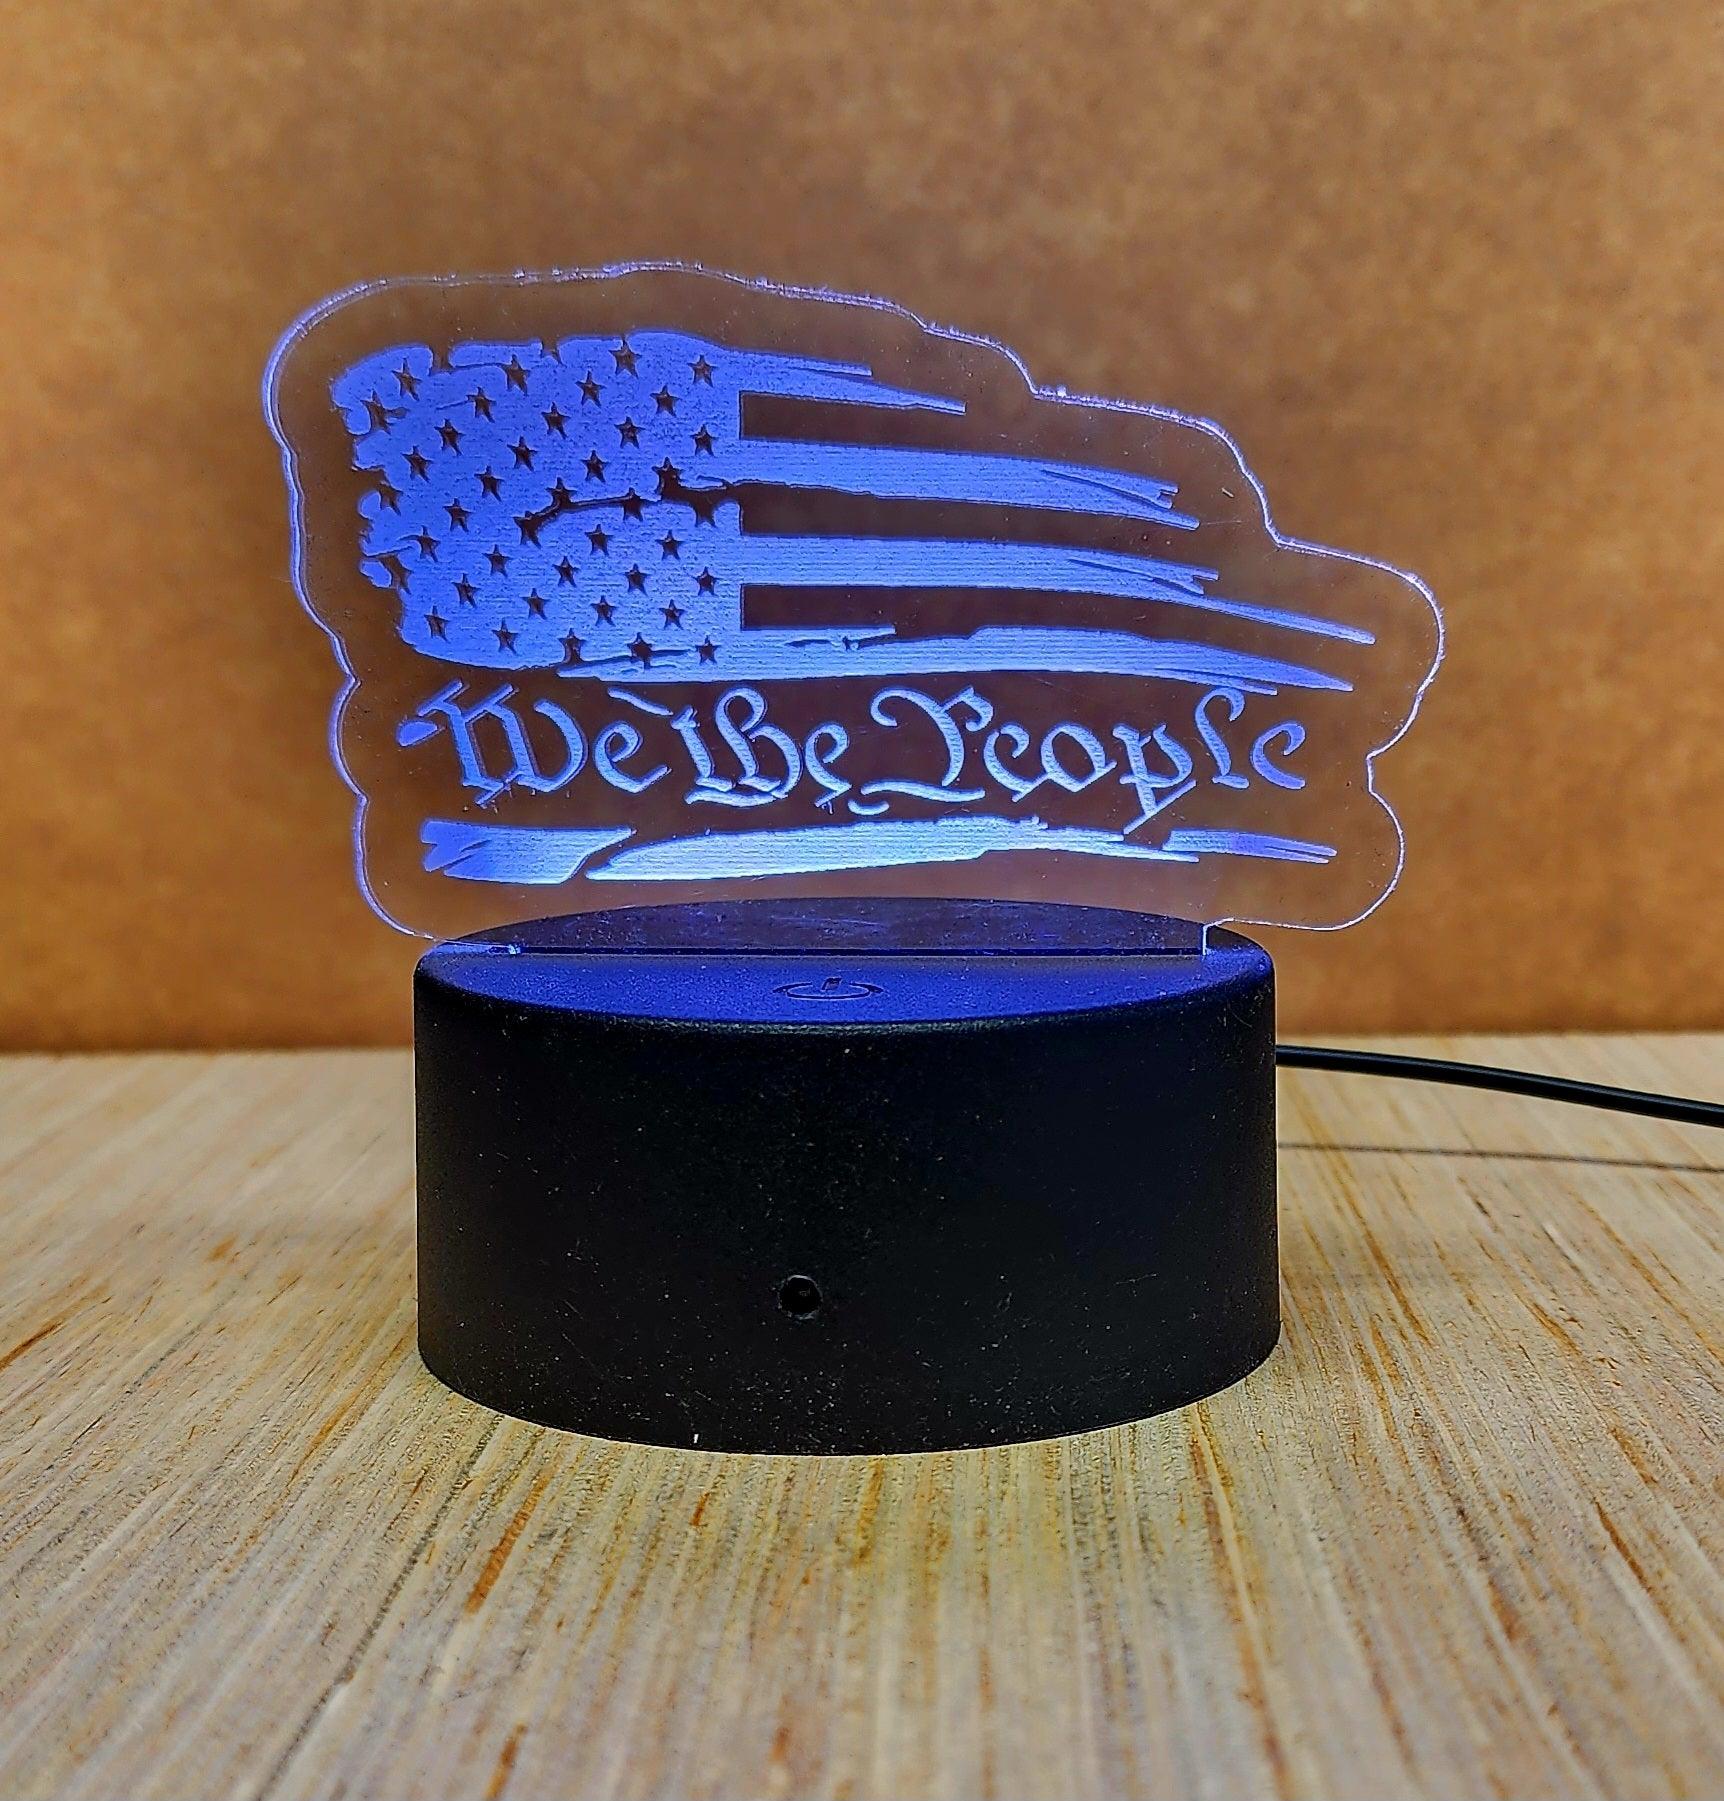 Laser Engraved Acrylic Signs with LED lighted base - Fairy Wolf Creations